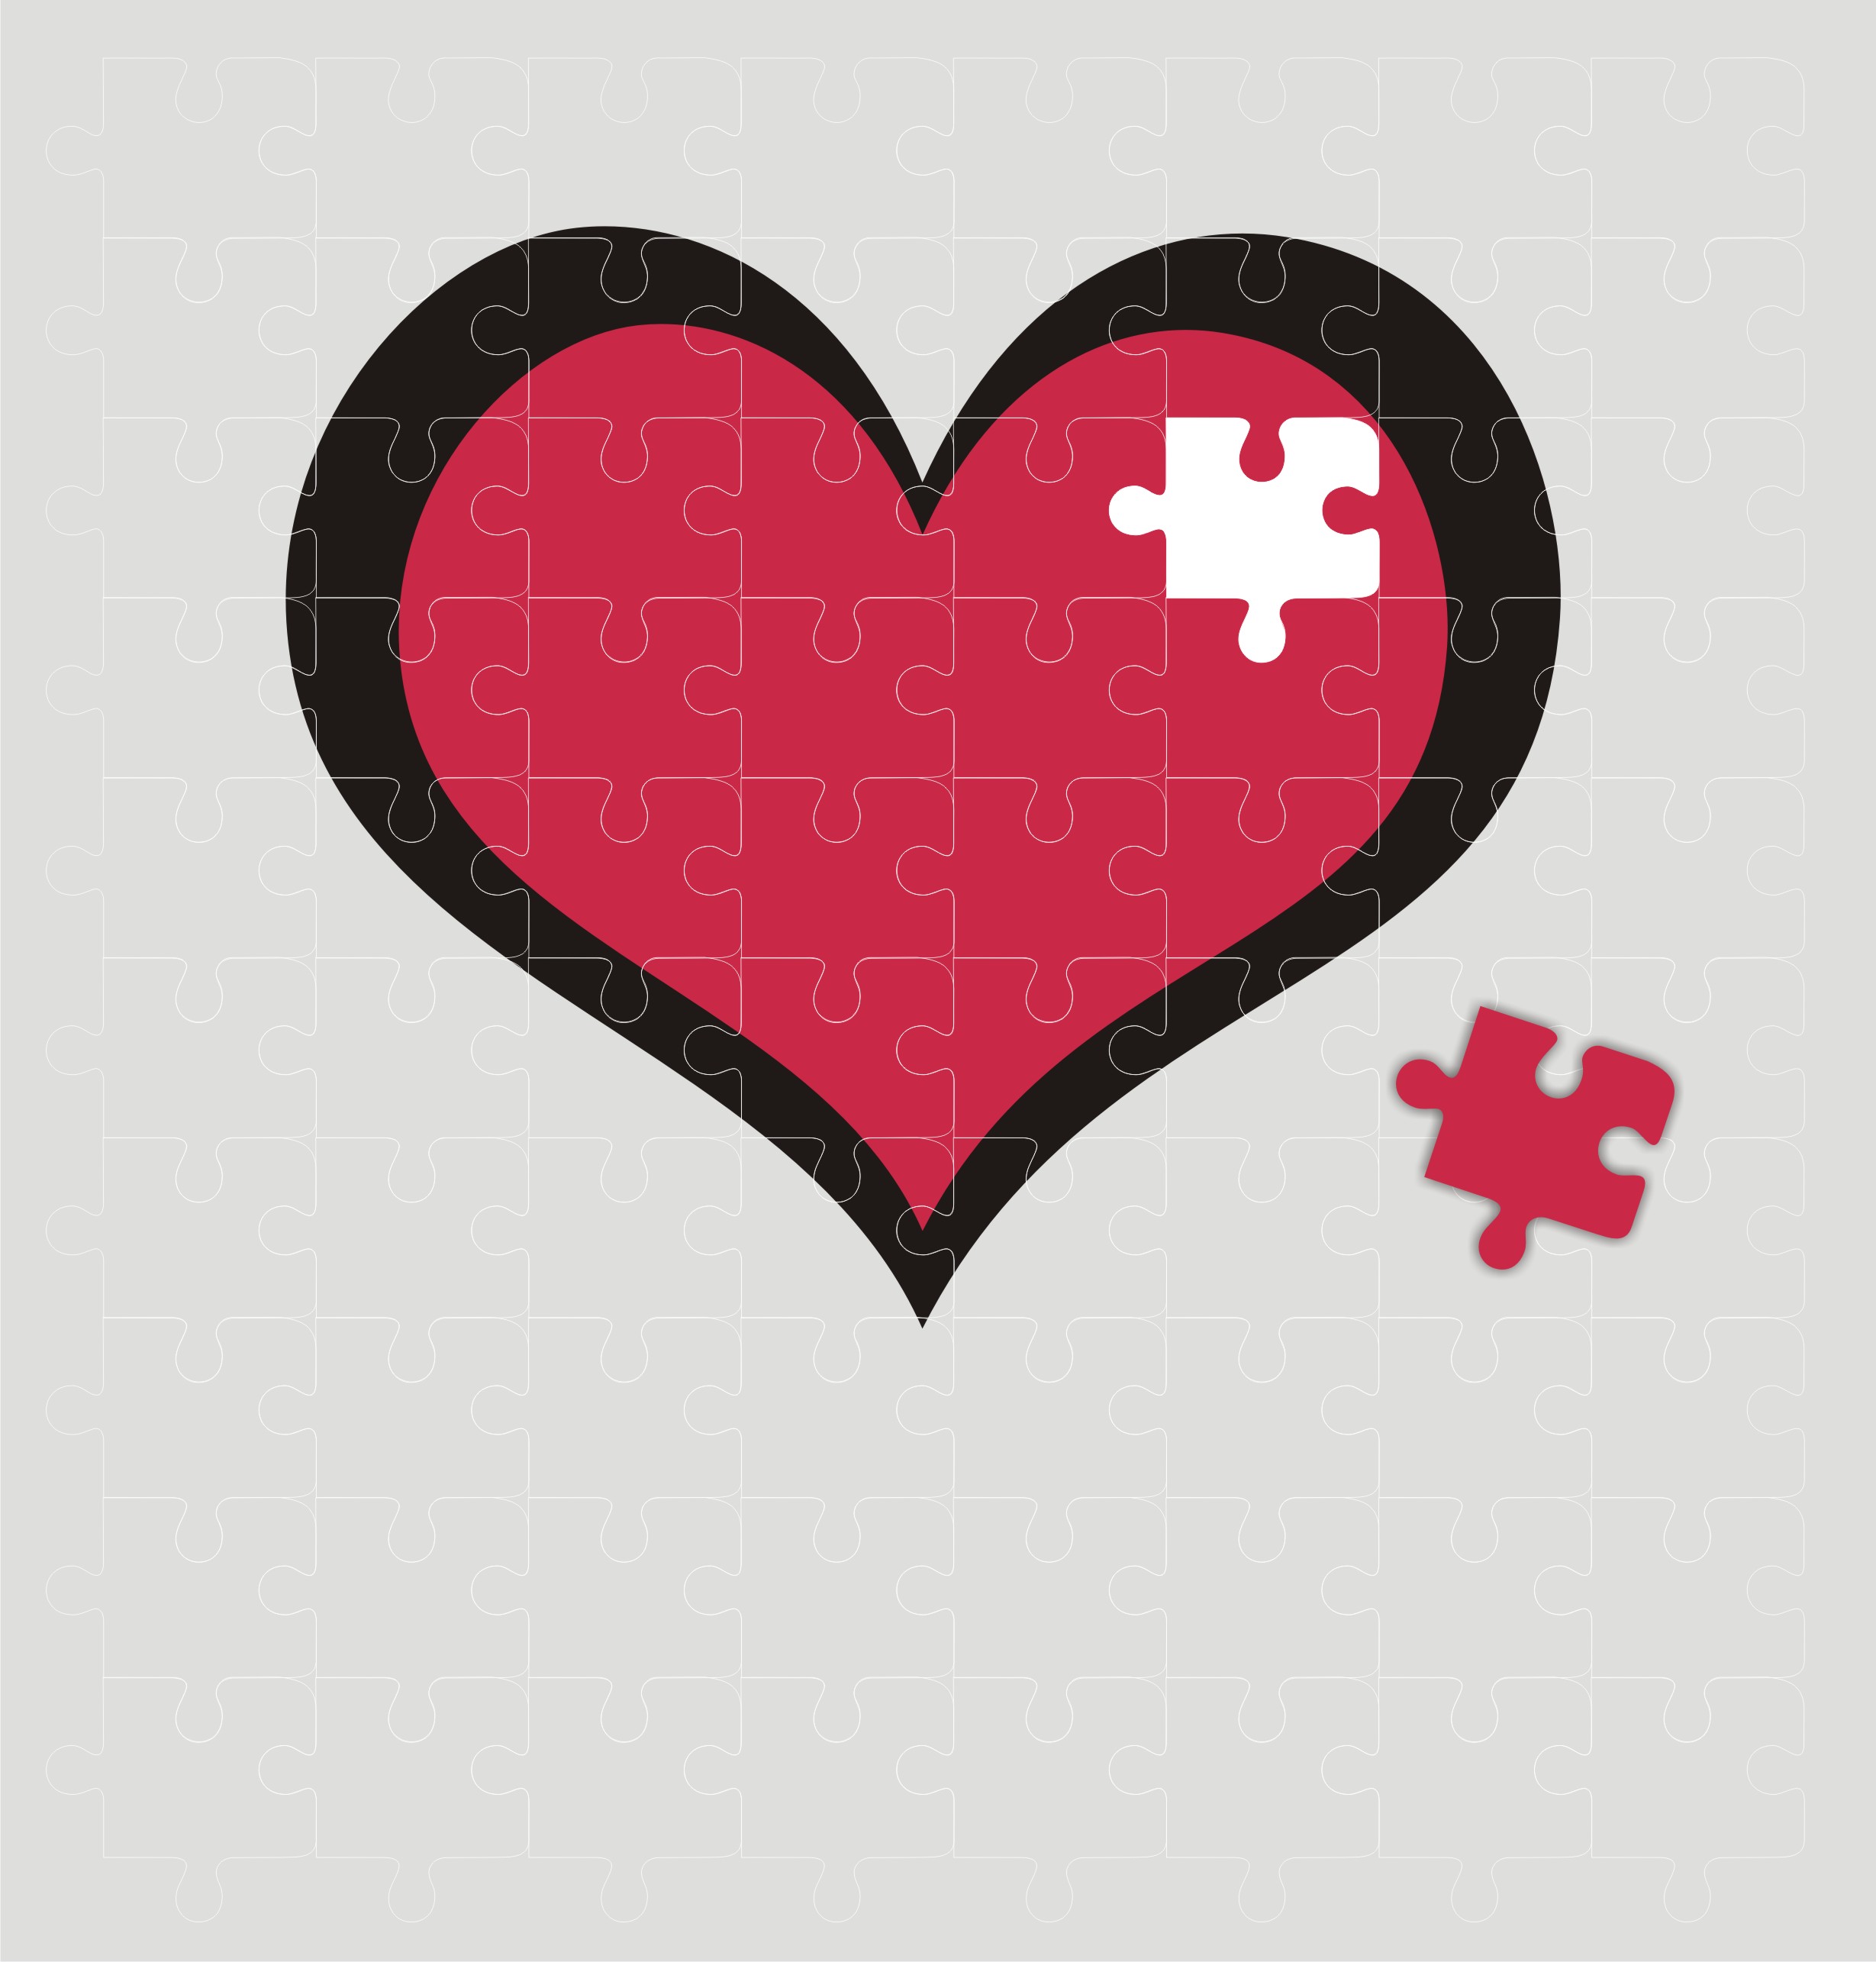 Puzzle Heart Vector by Markhal on Clipart library